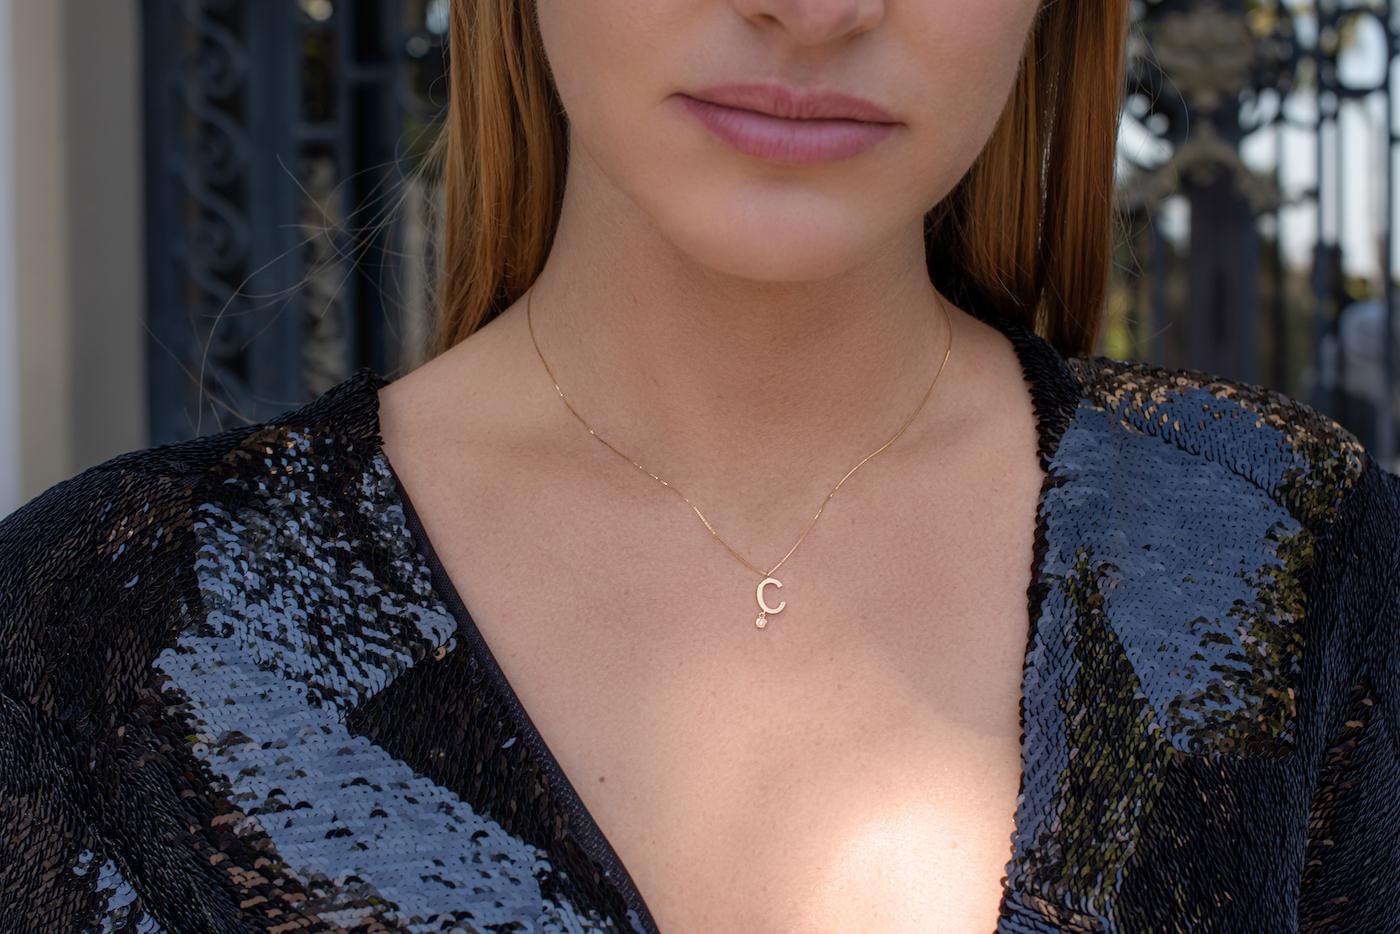 LETTRE C model, necklace in solid 18K yellow gold adorned with 1 round brilliant synthetic diamond of 0.01 carat.

• Venetian mesh, spring ring clasp.

• Carats: 0.01 ct total

• Color: DEF

• Clarity: VS

• Venetian mesh, spring ring clasp.

• 1.60